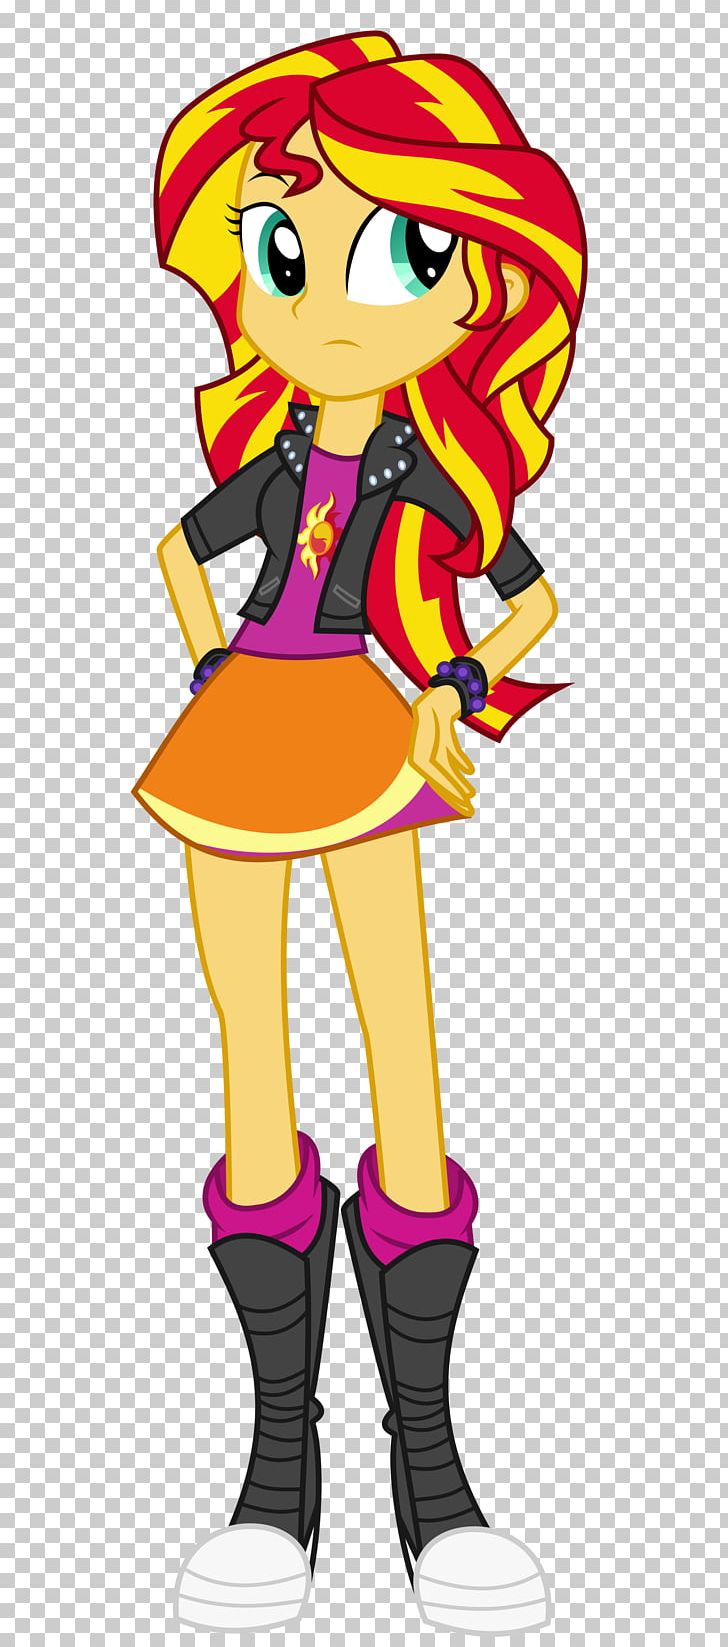 Sunset Shimmer Pony Pinkie Pie Princess Celestia Rainbow Dash PNG, Clipart, Anime, Cartoon, Equestria, Fictional Character, Friendship Free PNG Download